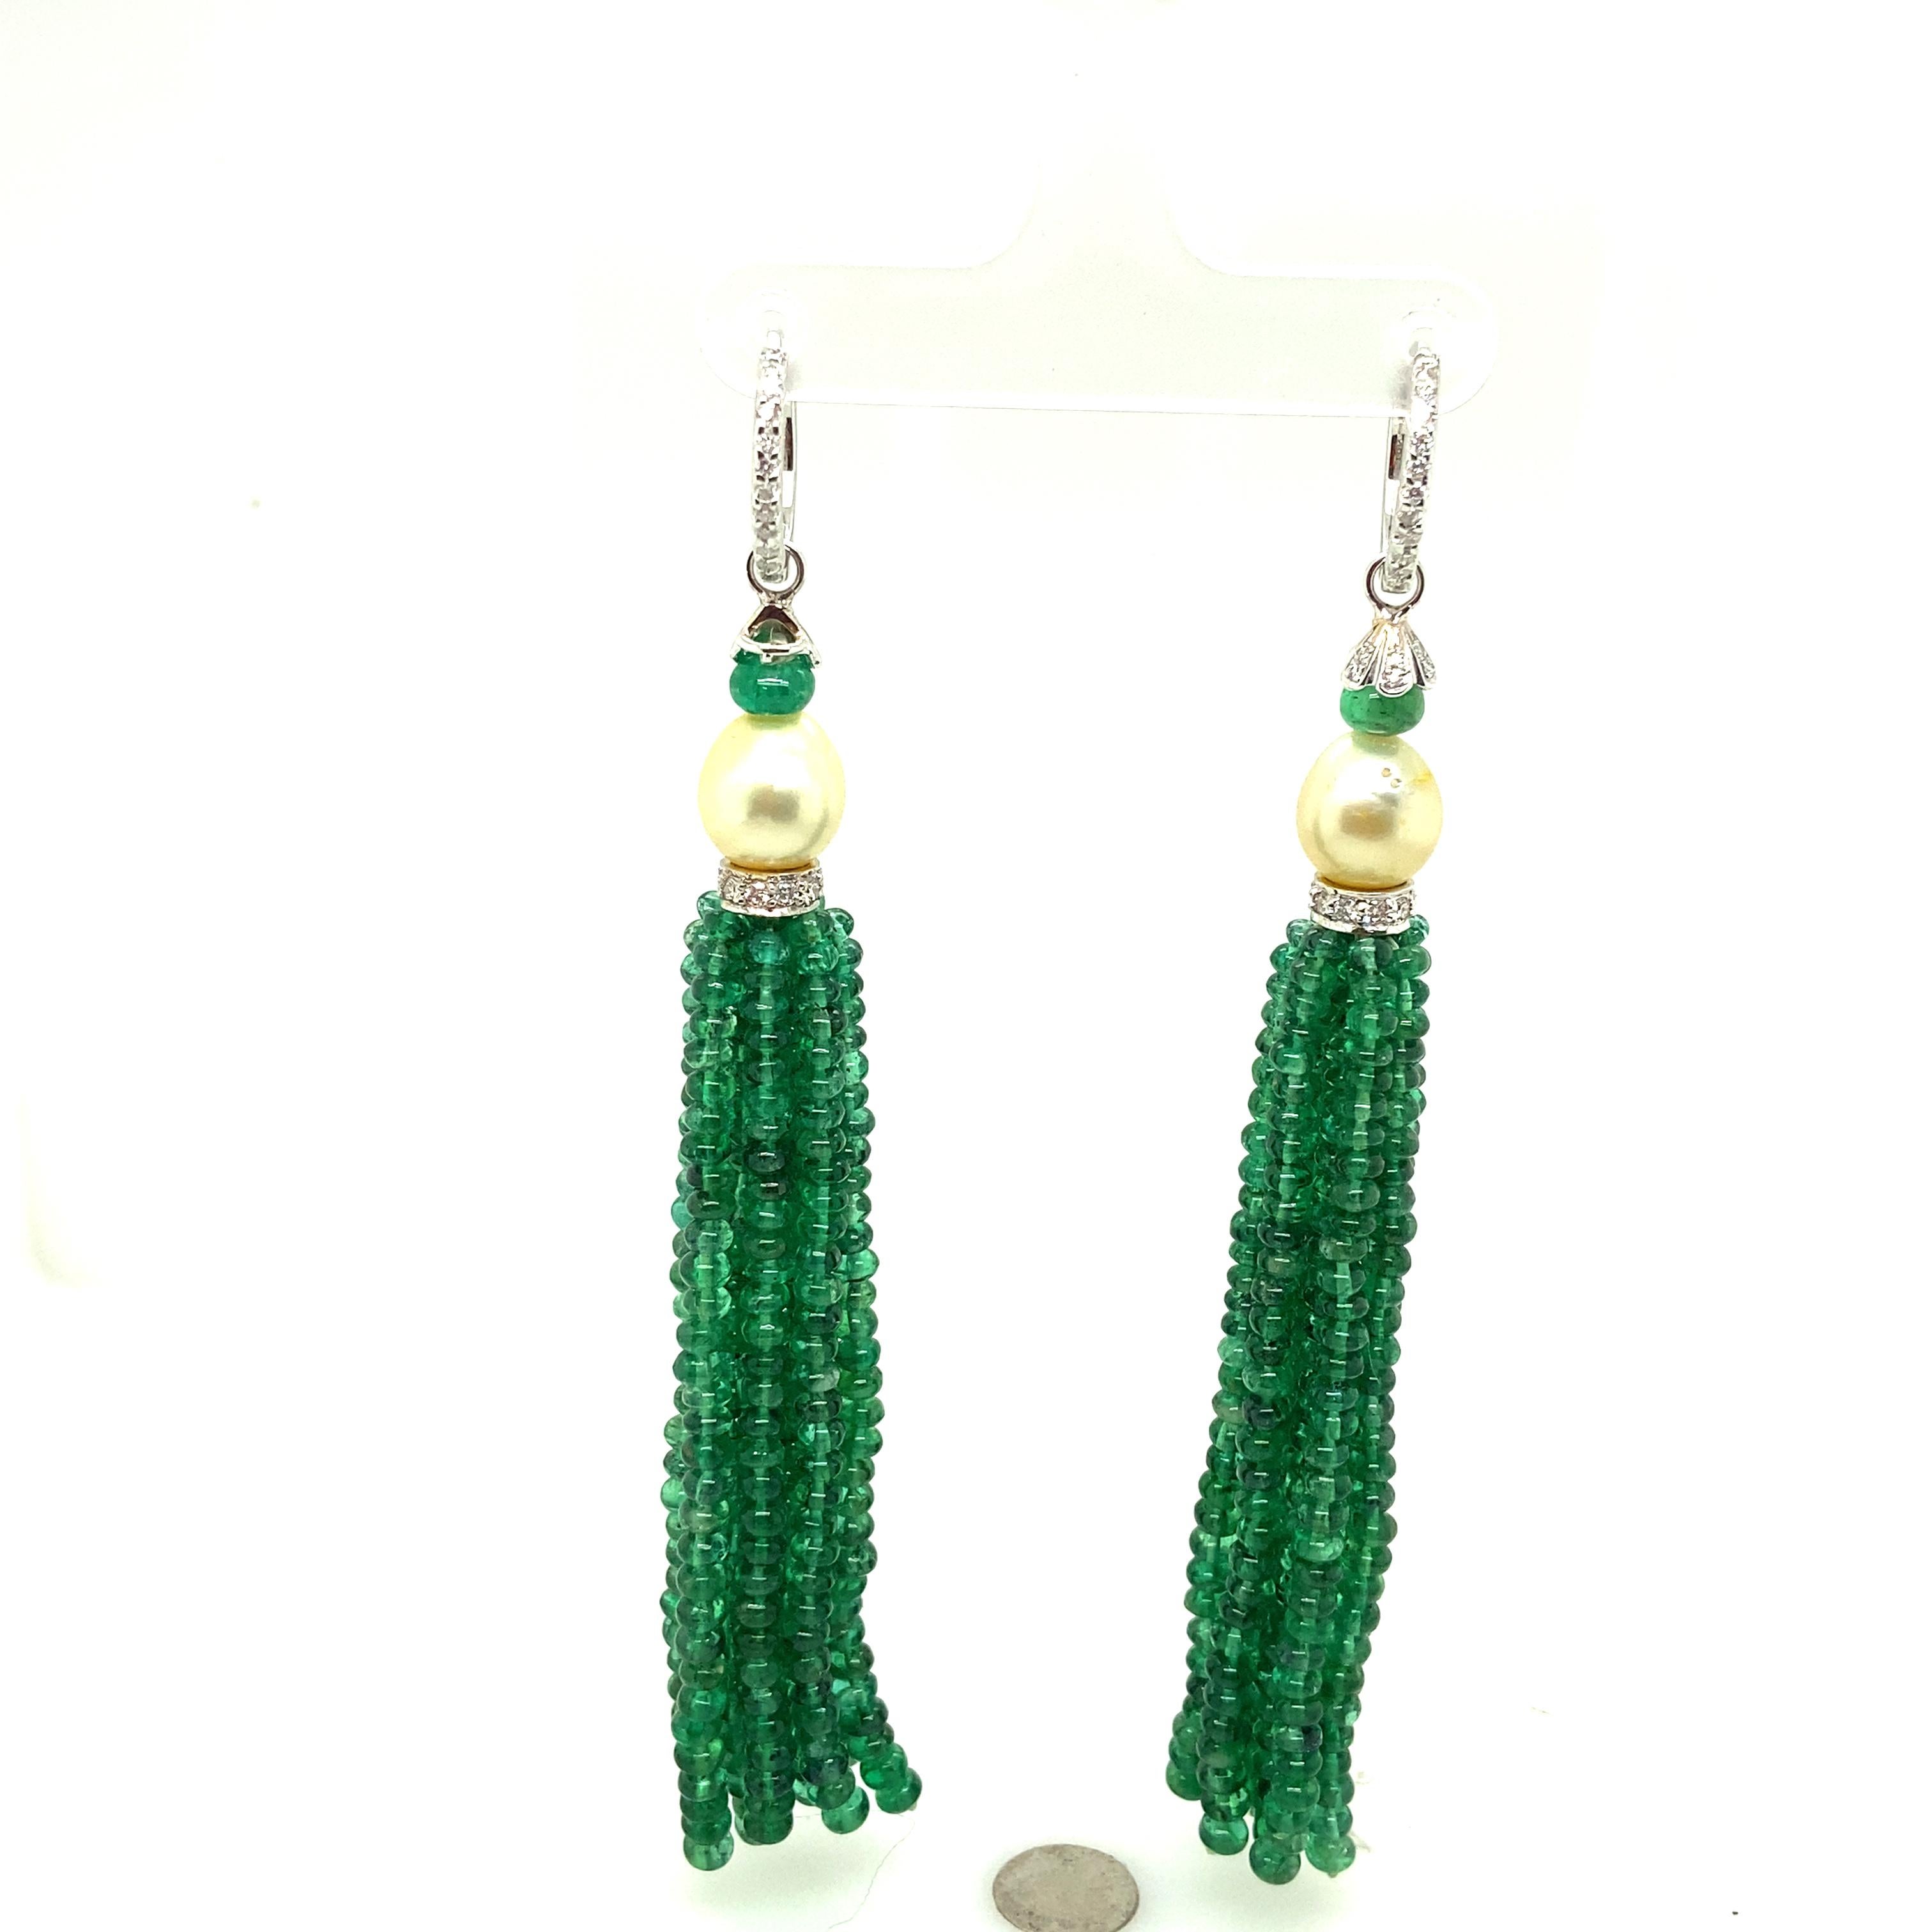 Natural Vivid Green Emerald Beads and Cultured Pearl Tassel Diamond Earrings:

A beautiful pair of earrings, it features natural vivid green emerald beads weighing 106.16 carat assembled as tassels, with a pair of luscious cultured pearls weighing